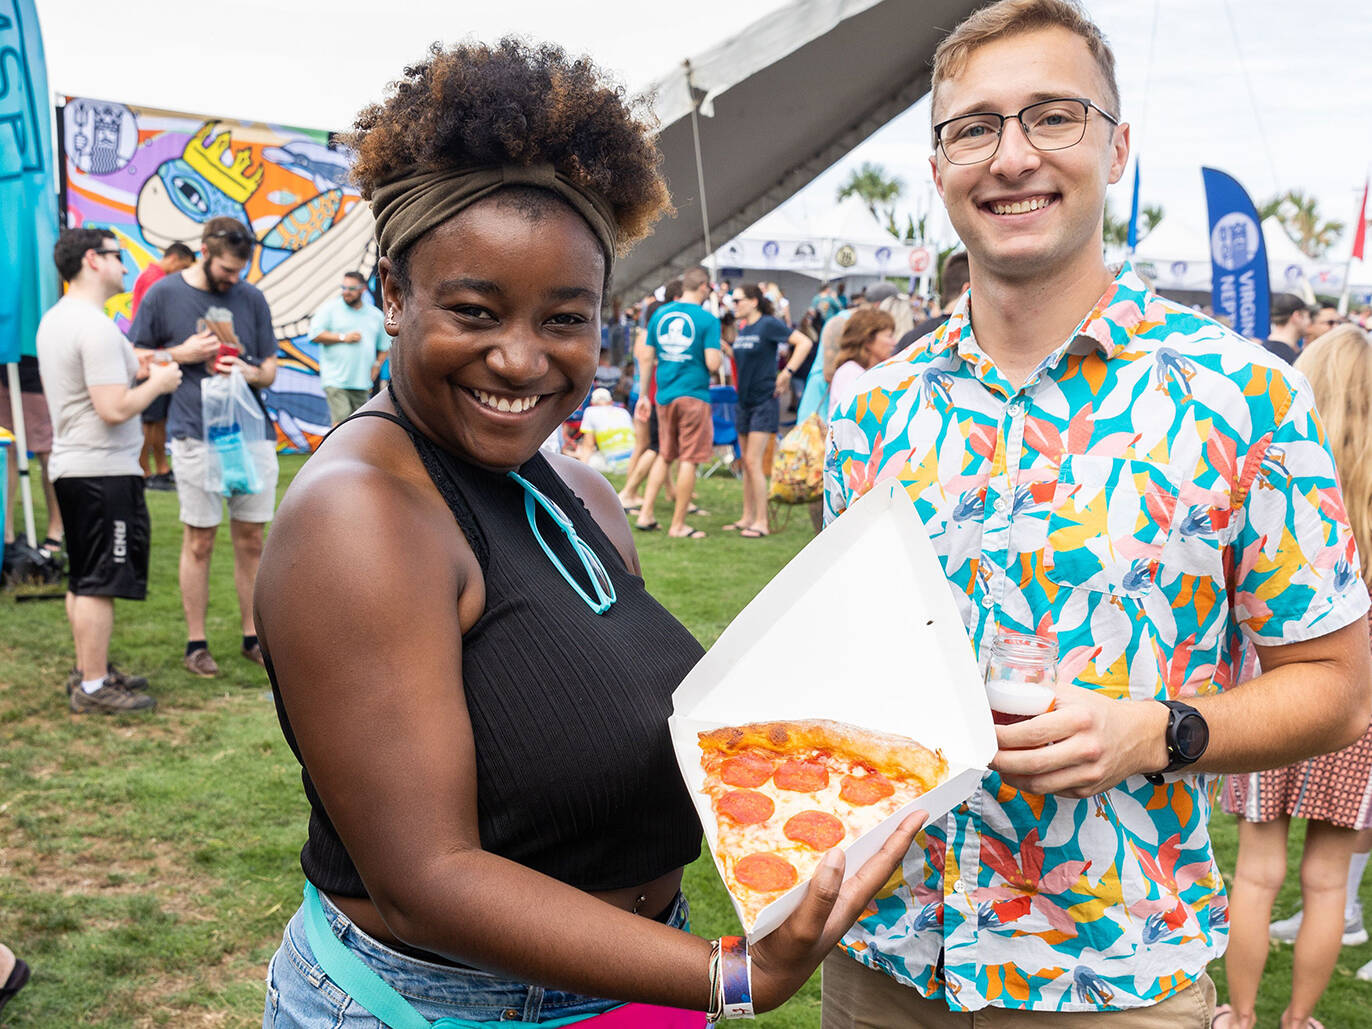 Couple posing with pizza and beer for photo during Coastal Craft Beer Festival